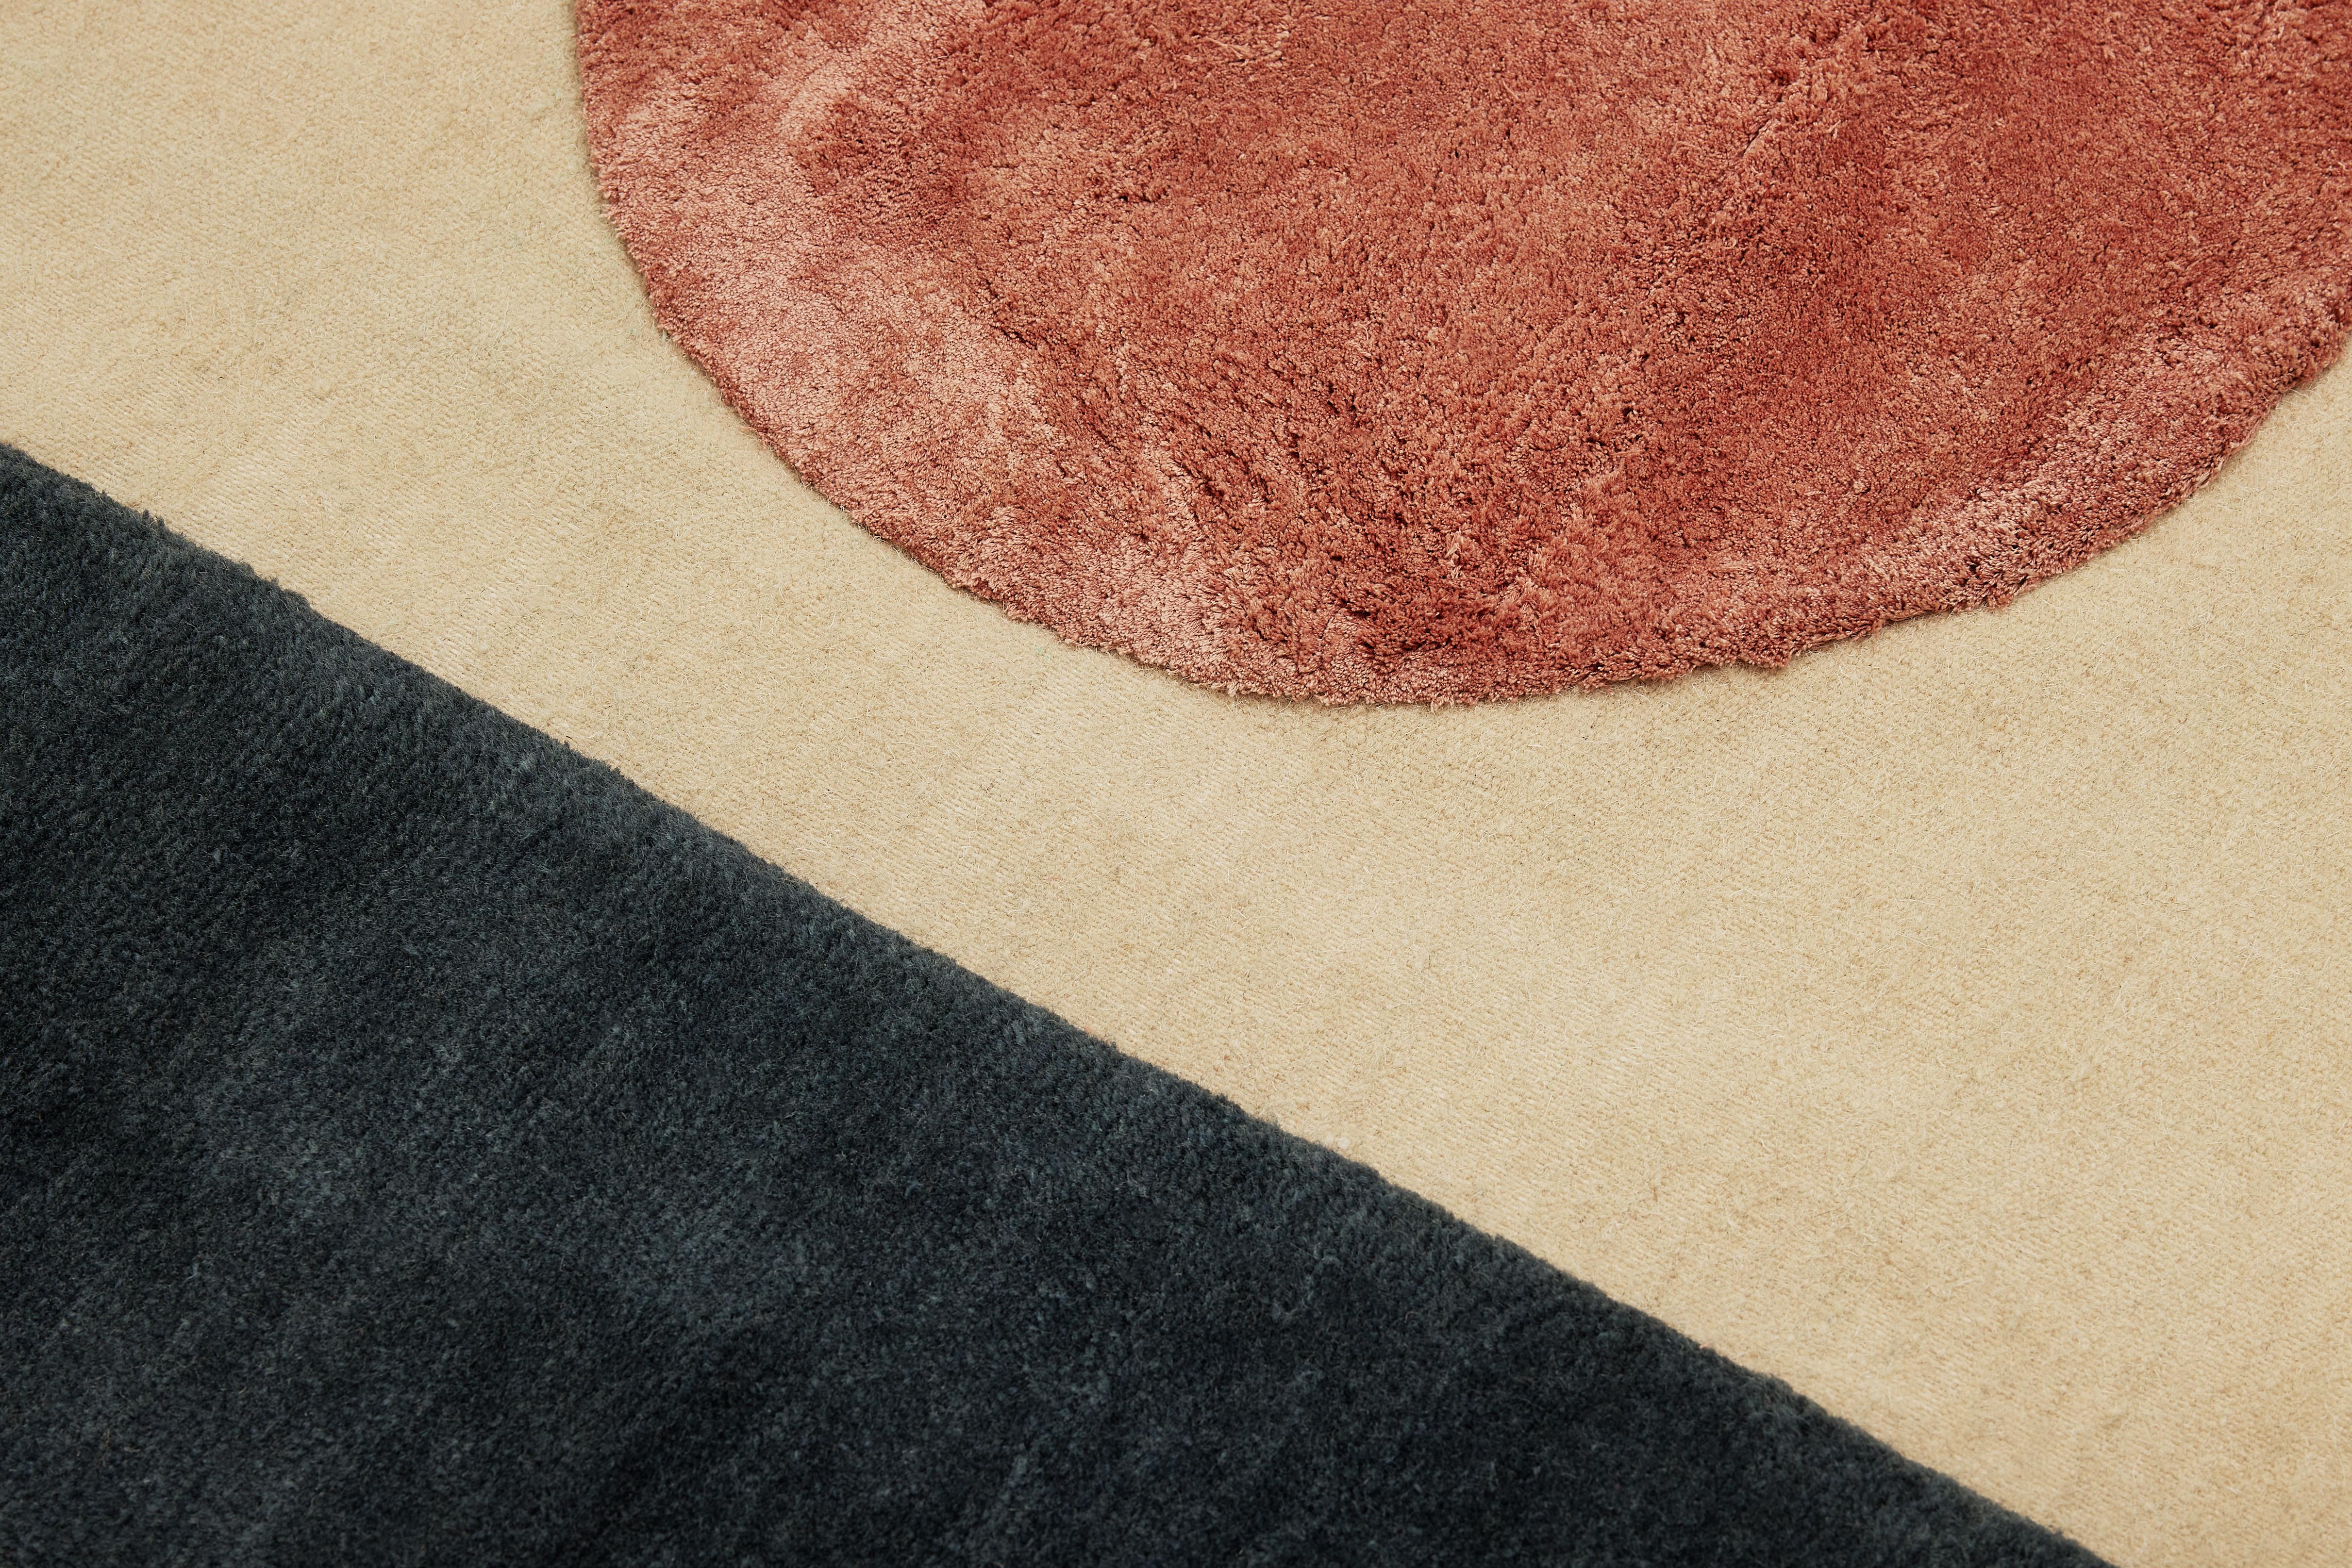 007.  Handwoven Kilim field with raised cut pile motif. Wool & silk 

In a world filled with complexity, there is beauty in simplicity. Welcome to our newest rug collection, where geometry meets minimalism and organic materials create an atmosphere